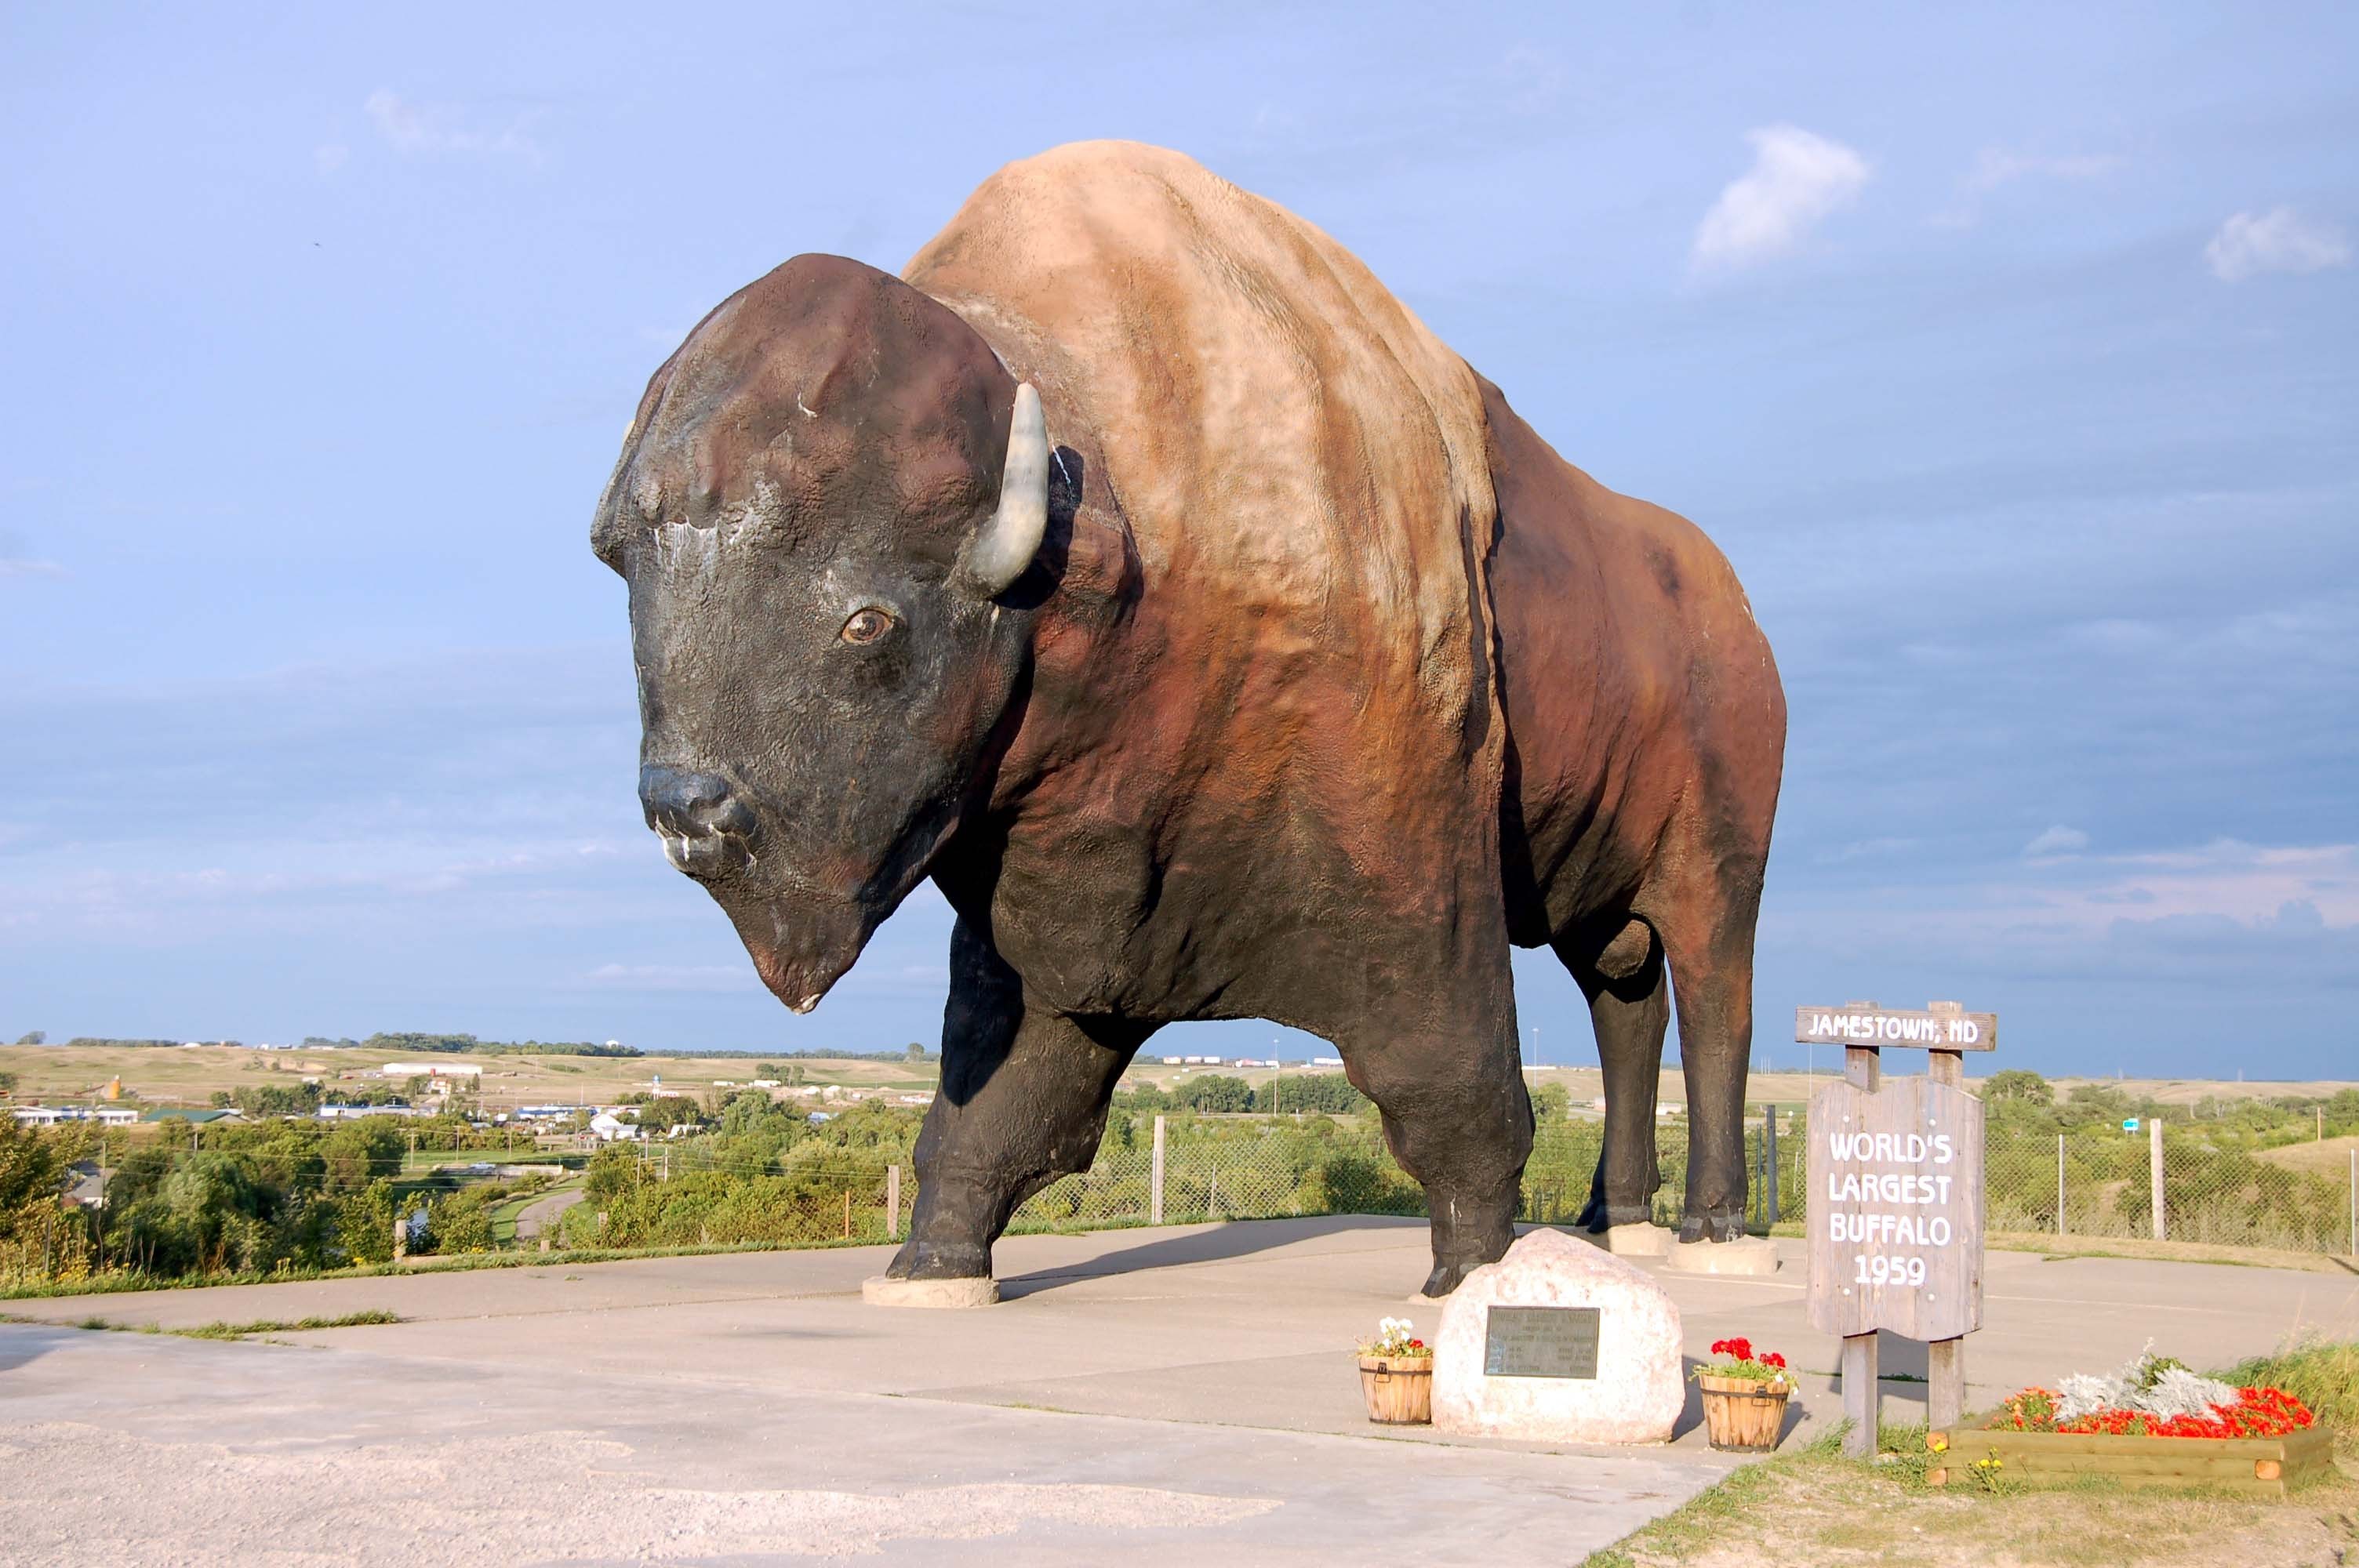 Slide 7 of 19: JAMESTOWN, ND - AUGUST 24: The World's Largest Buffalo, seen here on August 24, 2009, can be seen from I-94, and is nicknamed Dakota Thunder.  It is located in Frontier Village in Jamestown, ND; Shutterstock ID 78206956; Purchase Order: -